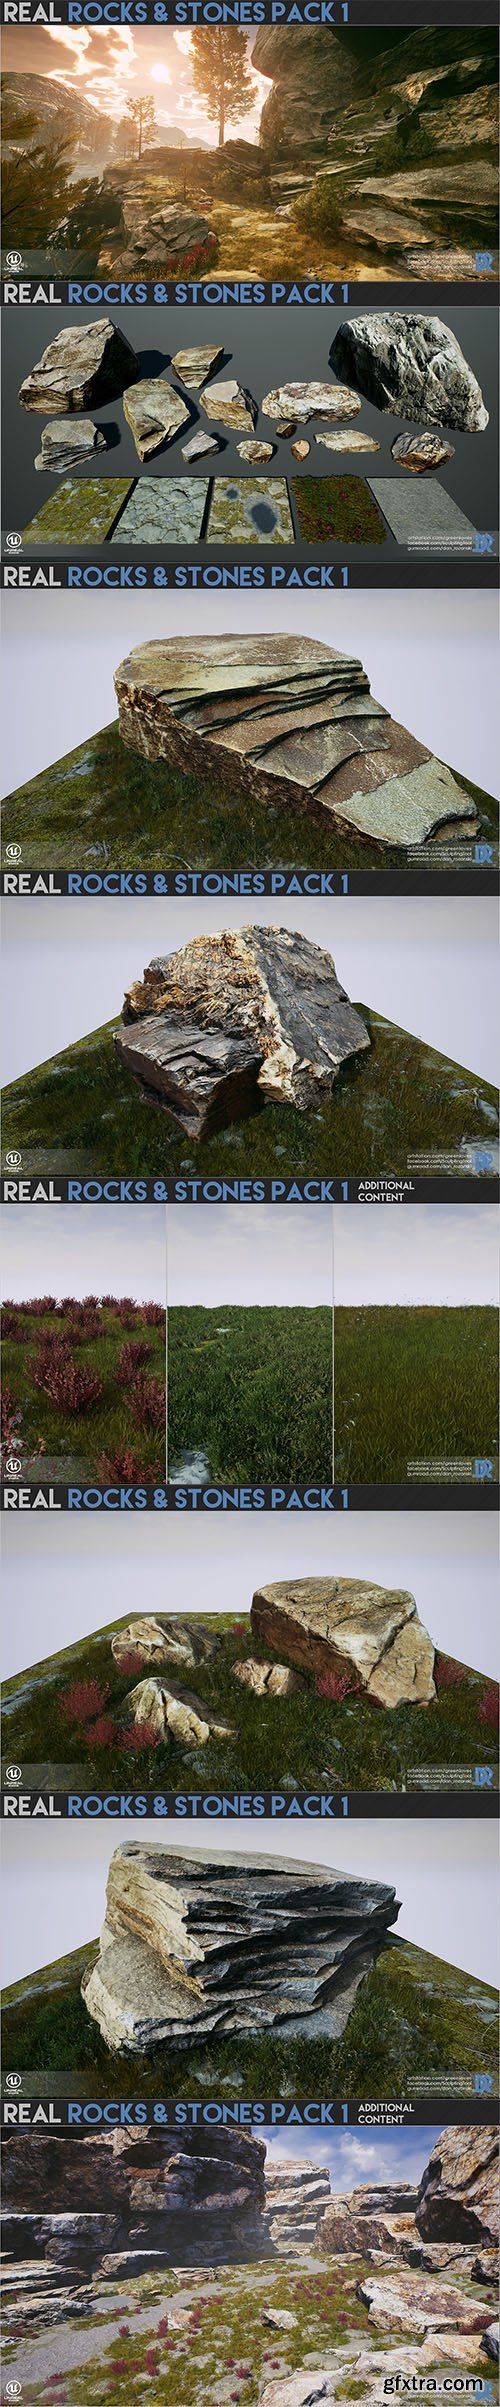 Cubebrush - Real Rocks and Stones pack I